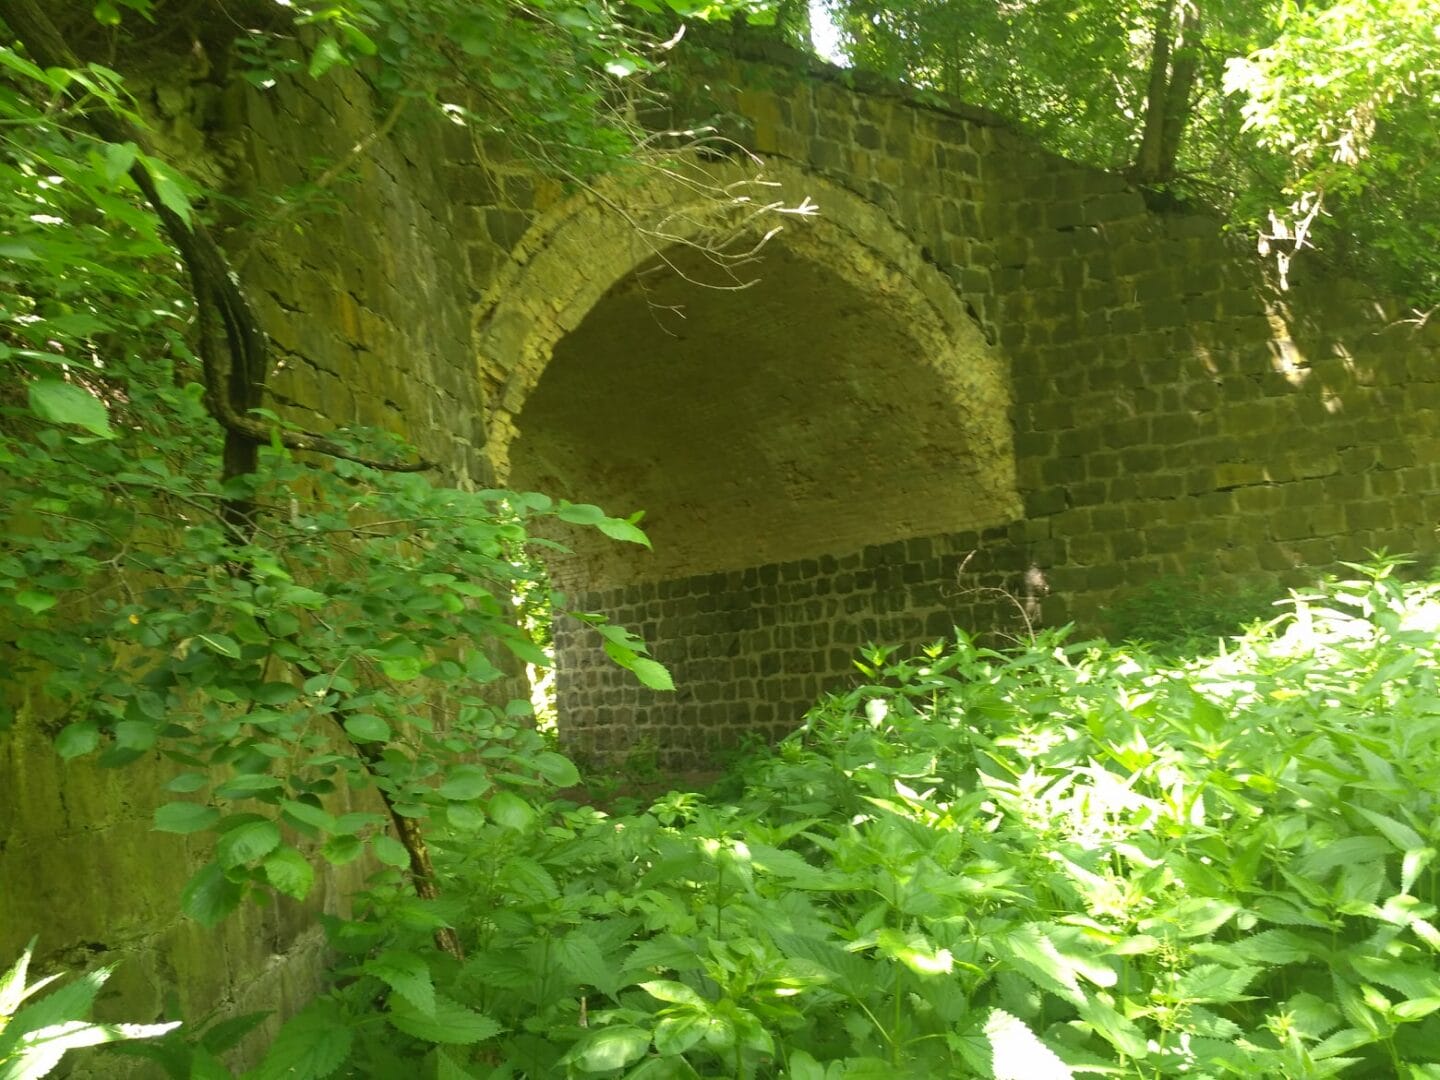 Remains of the Landlord’s Bridge